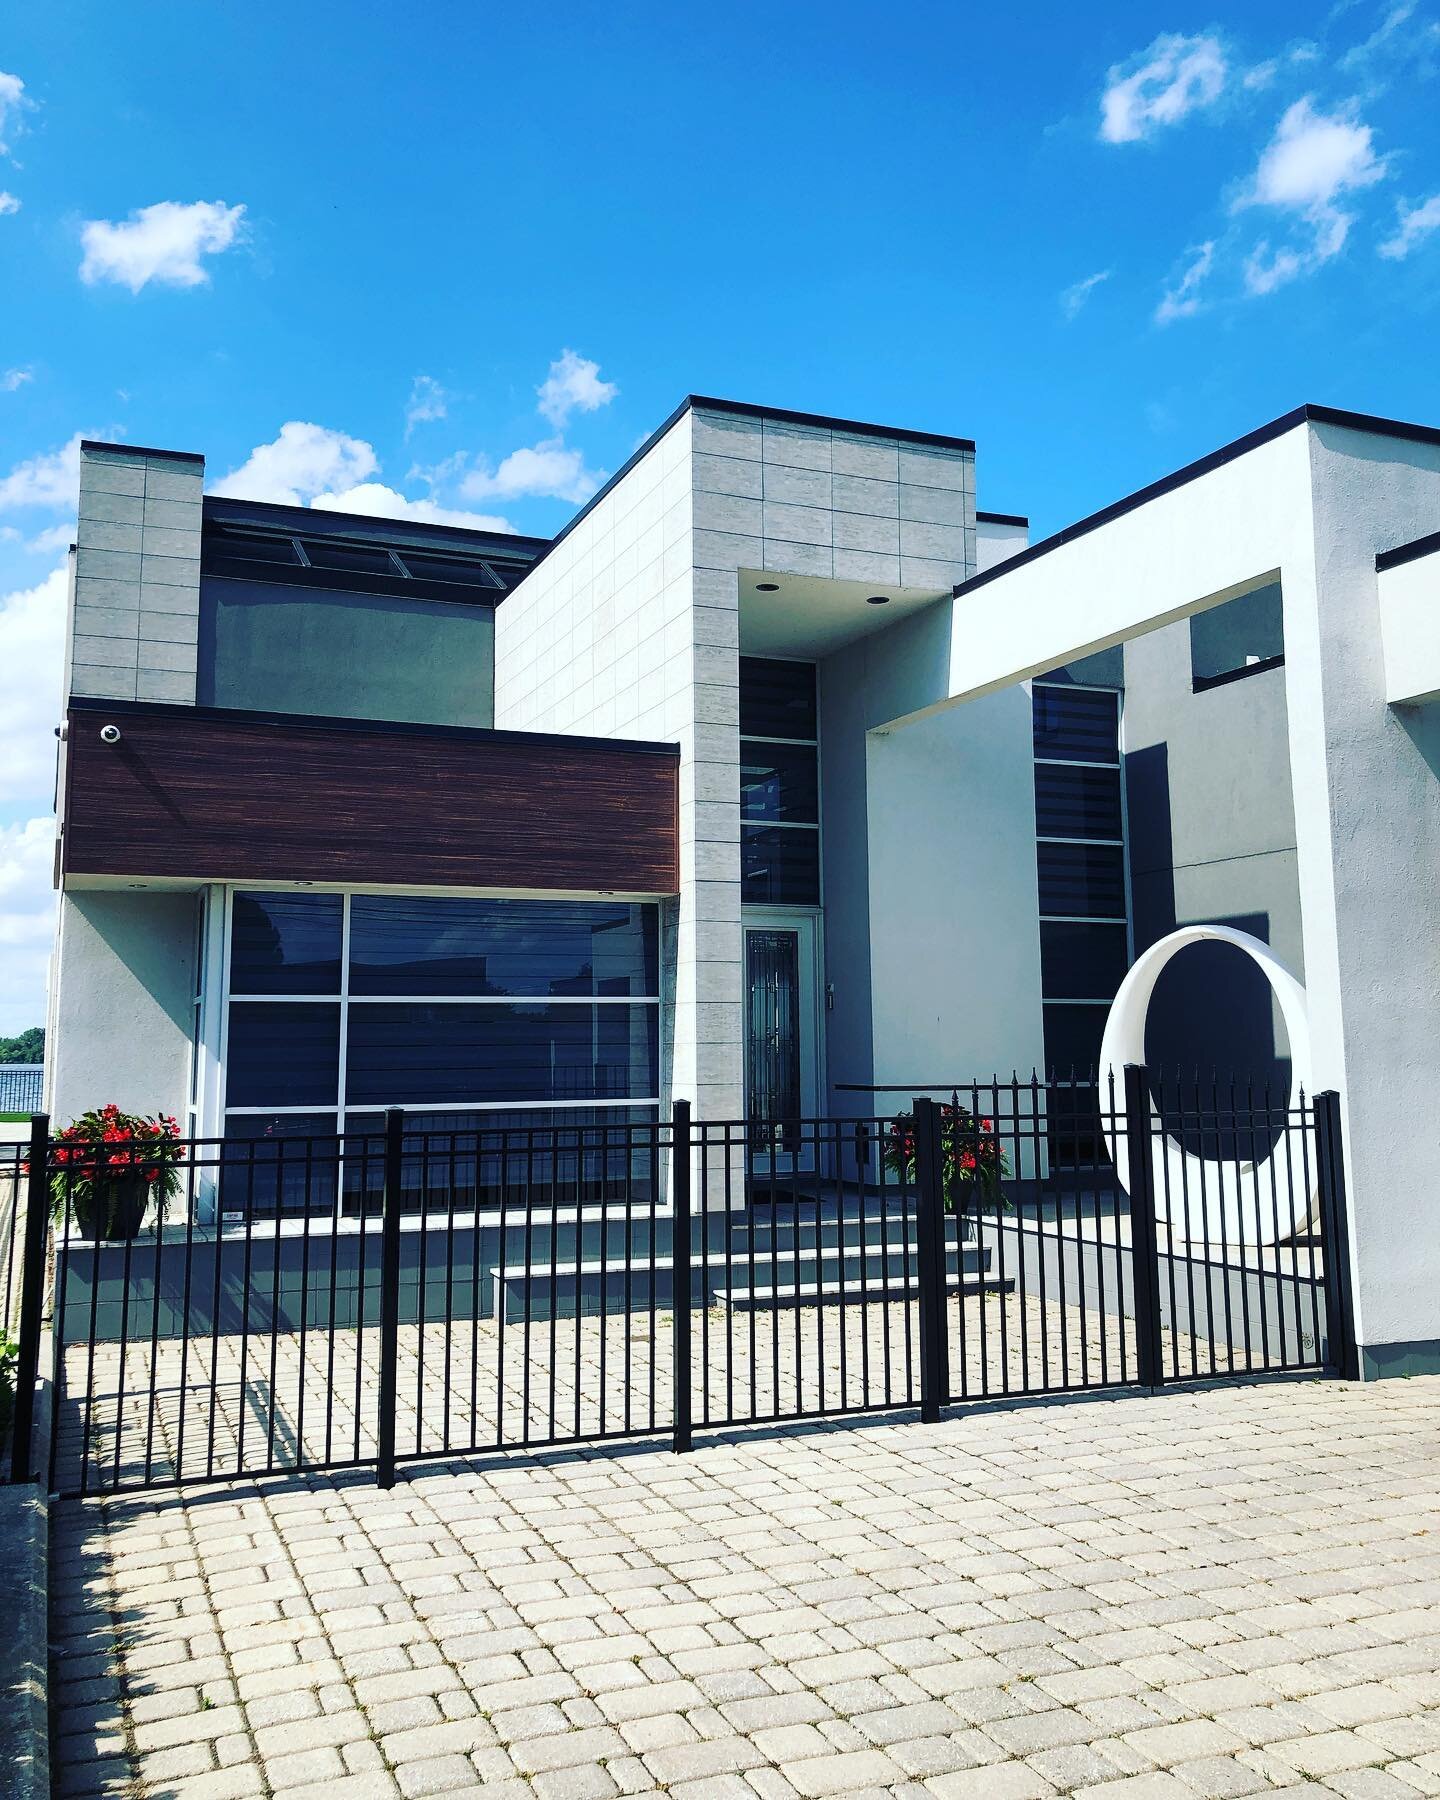 One of the houses our team worked on this week. All windows, glass railings and skylights.

&bull;
&bull;
&bull;
&bull;
&bull;
&bull;
&bull;
&bull;
#windowcleaning #windowcleaner #quality #service #windowcleaningwindsor #pressurewashing #windowwashin